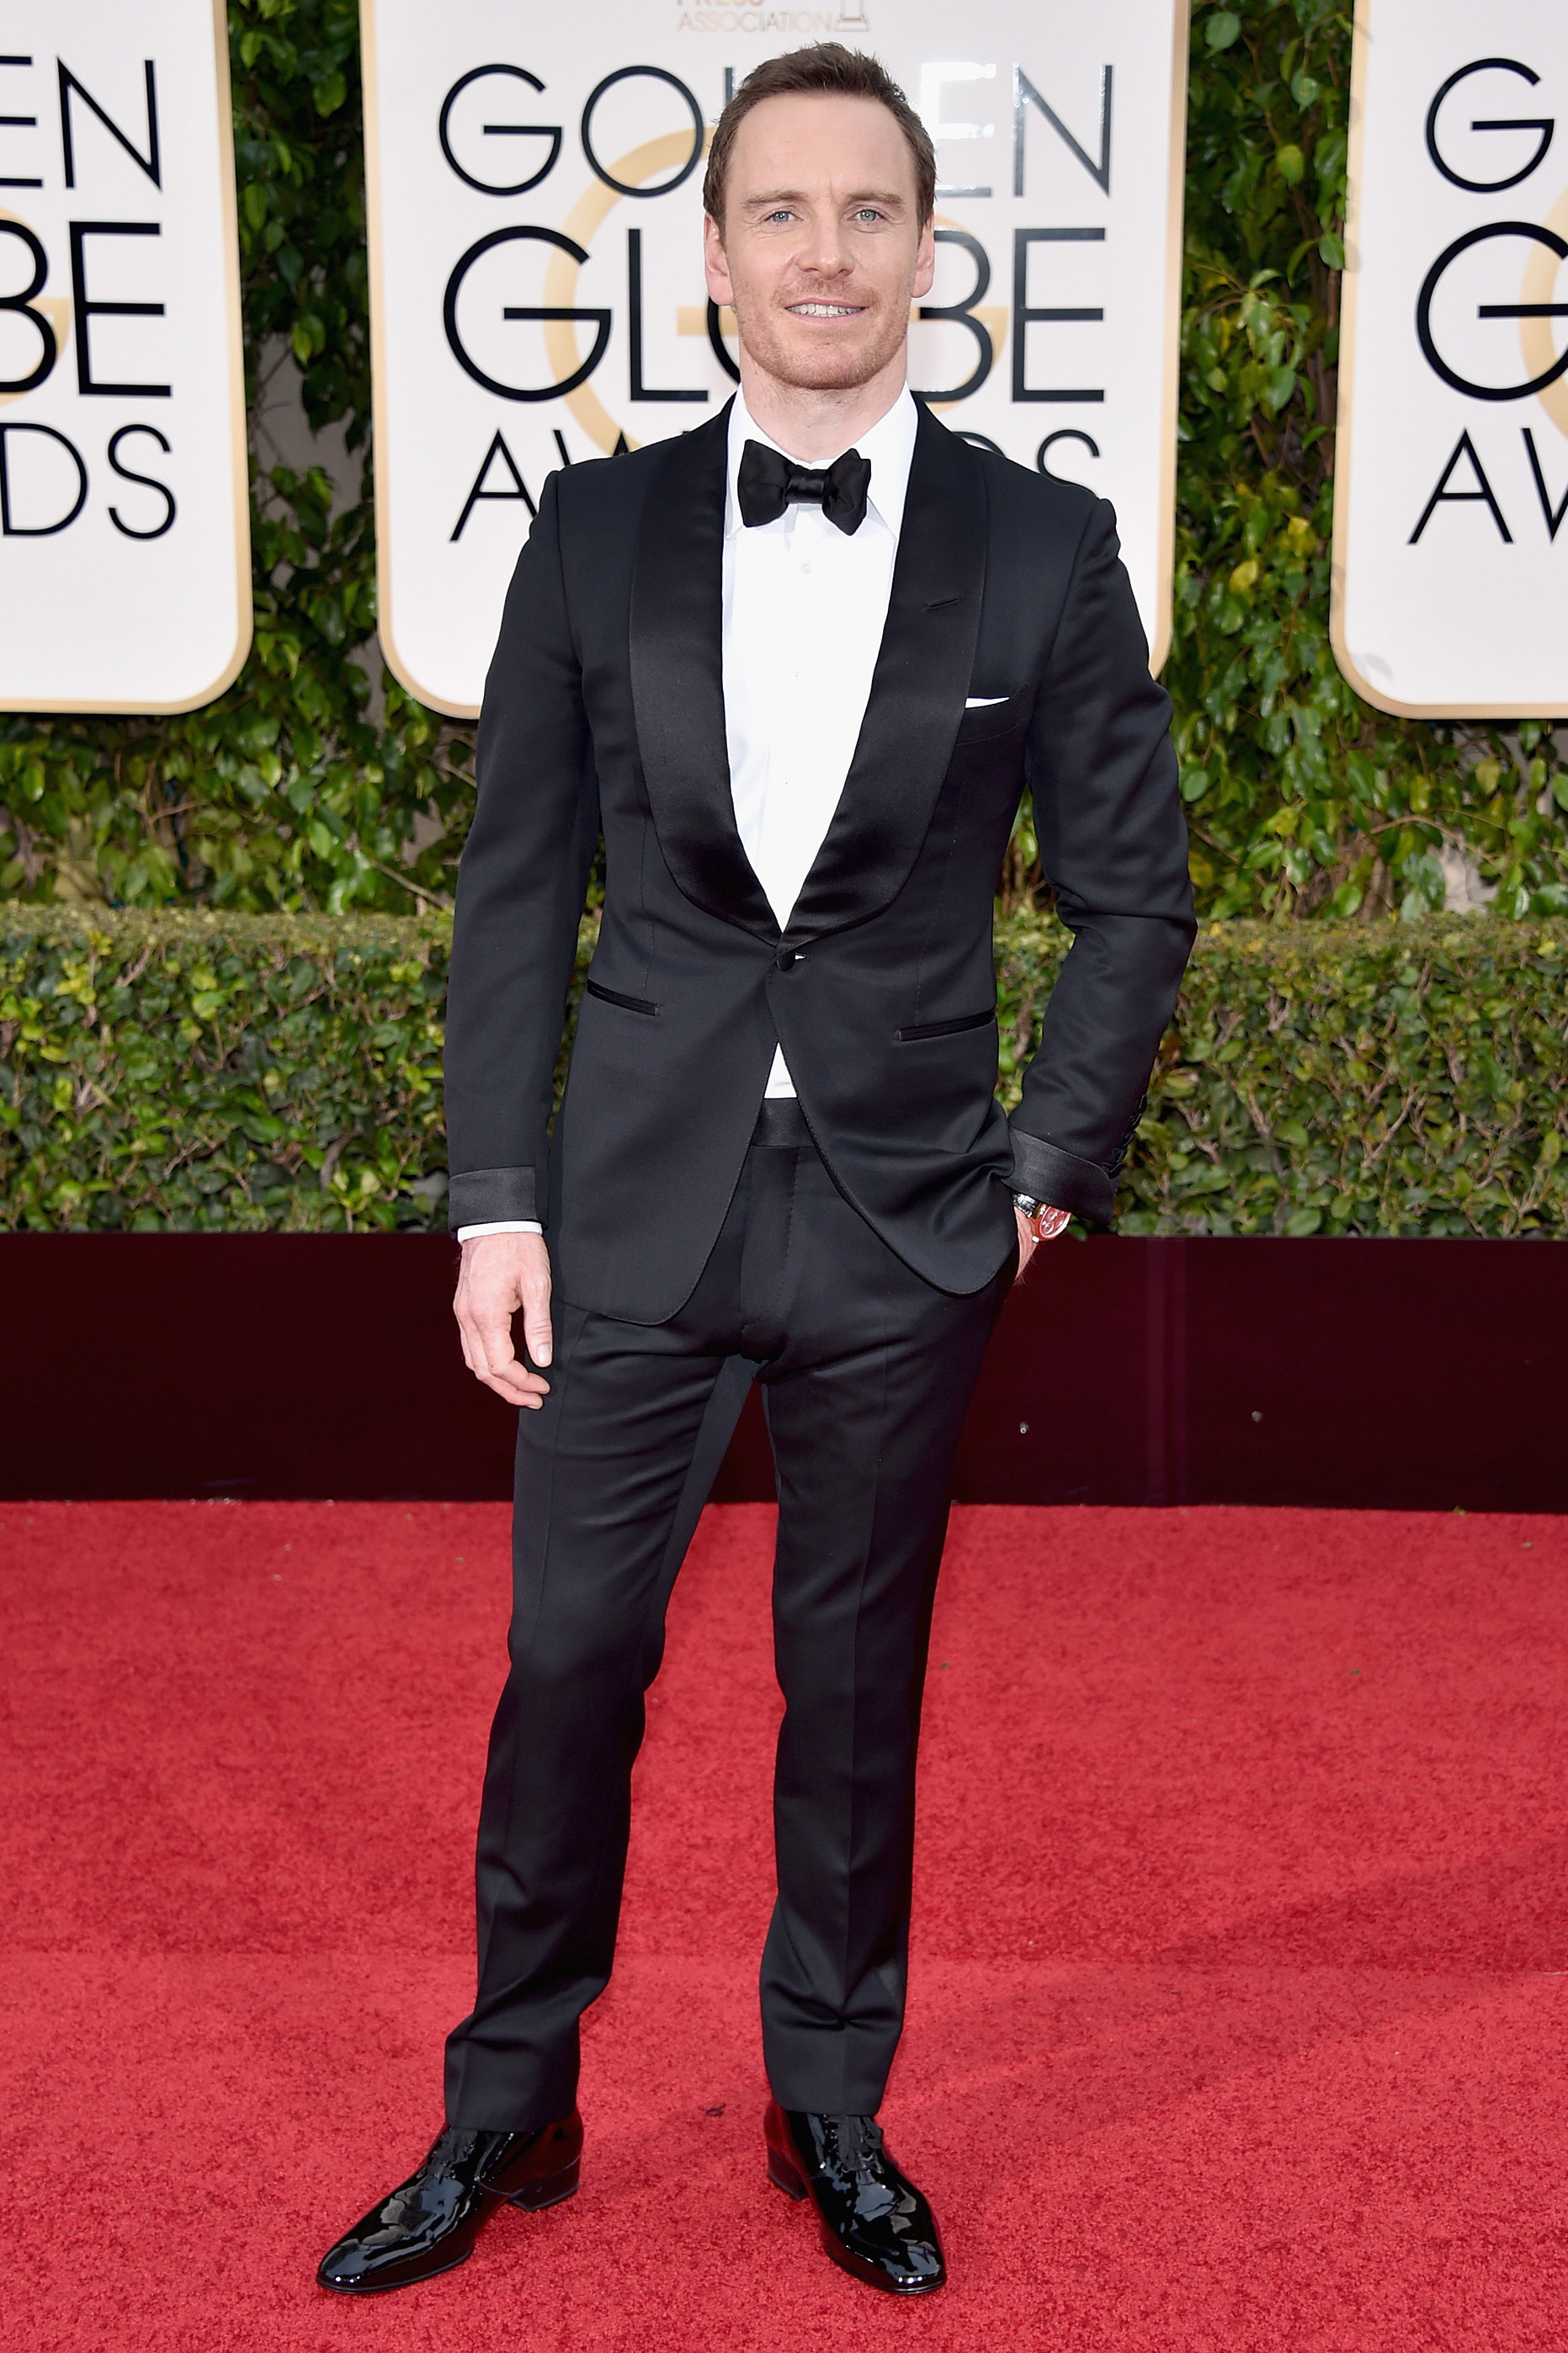 The 11 Best Dressed Men at the Golden Globes | HuffPost